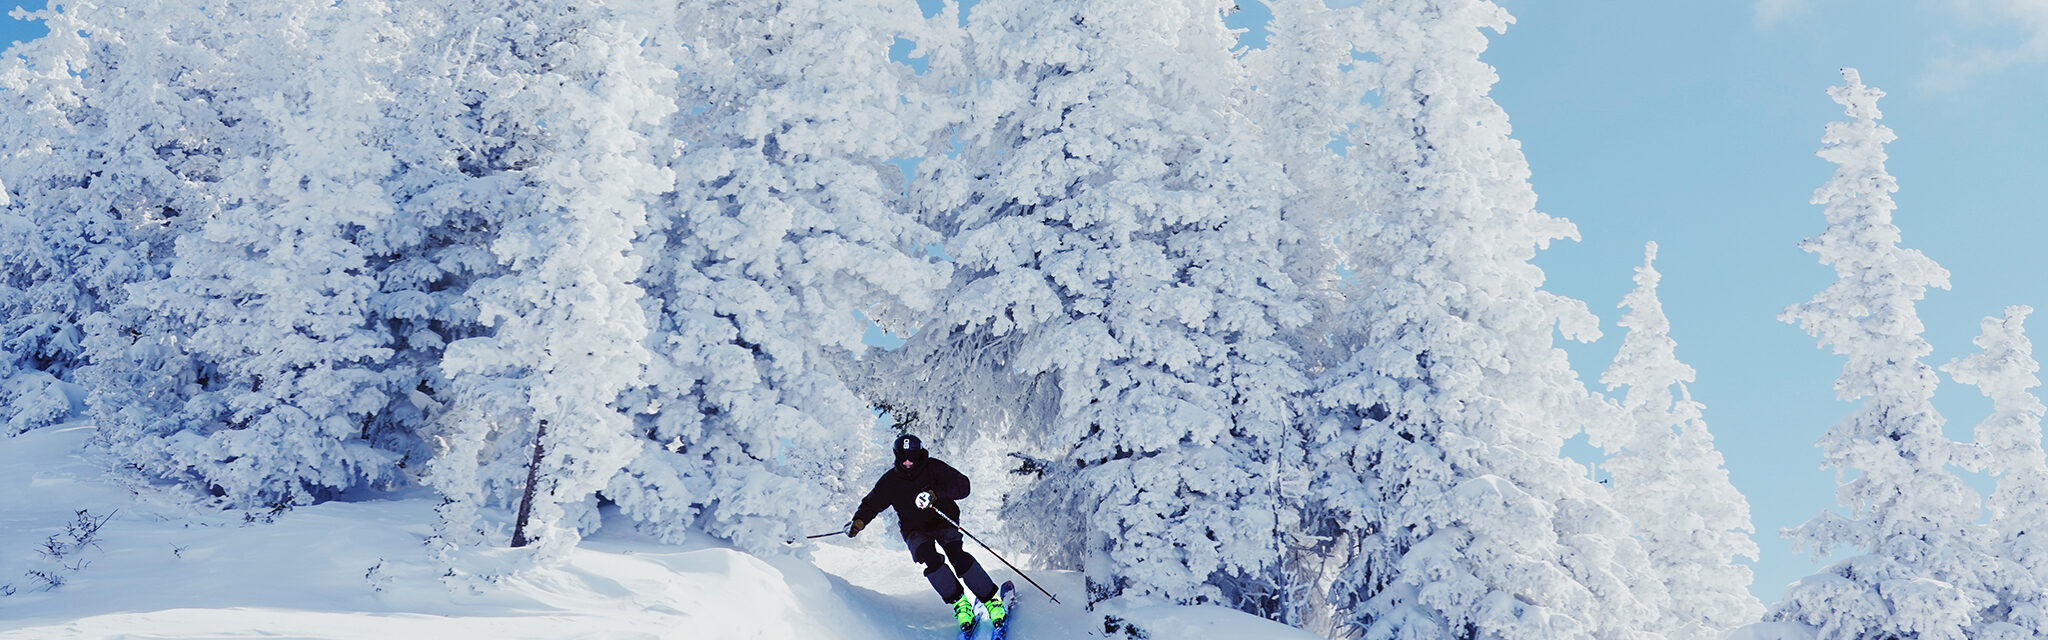 A skier exits a completely white, snow covered grove of trees.